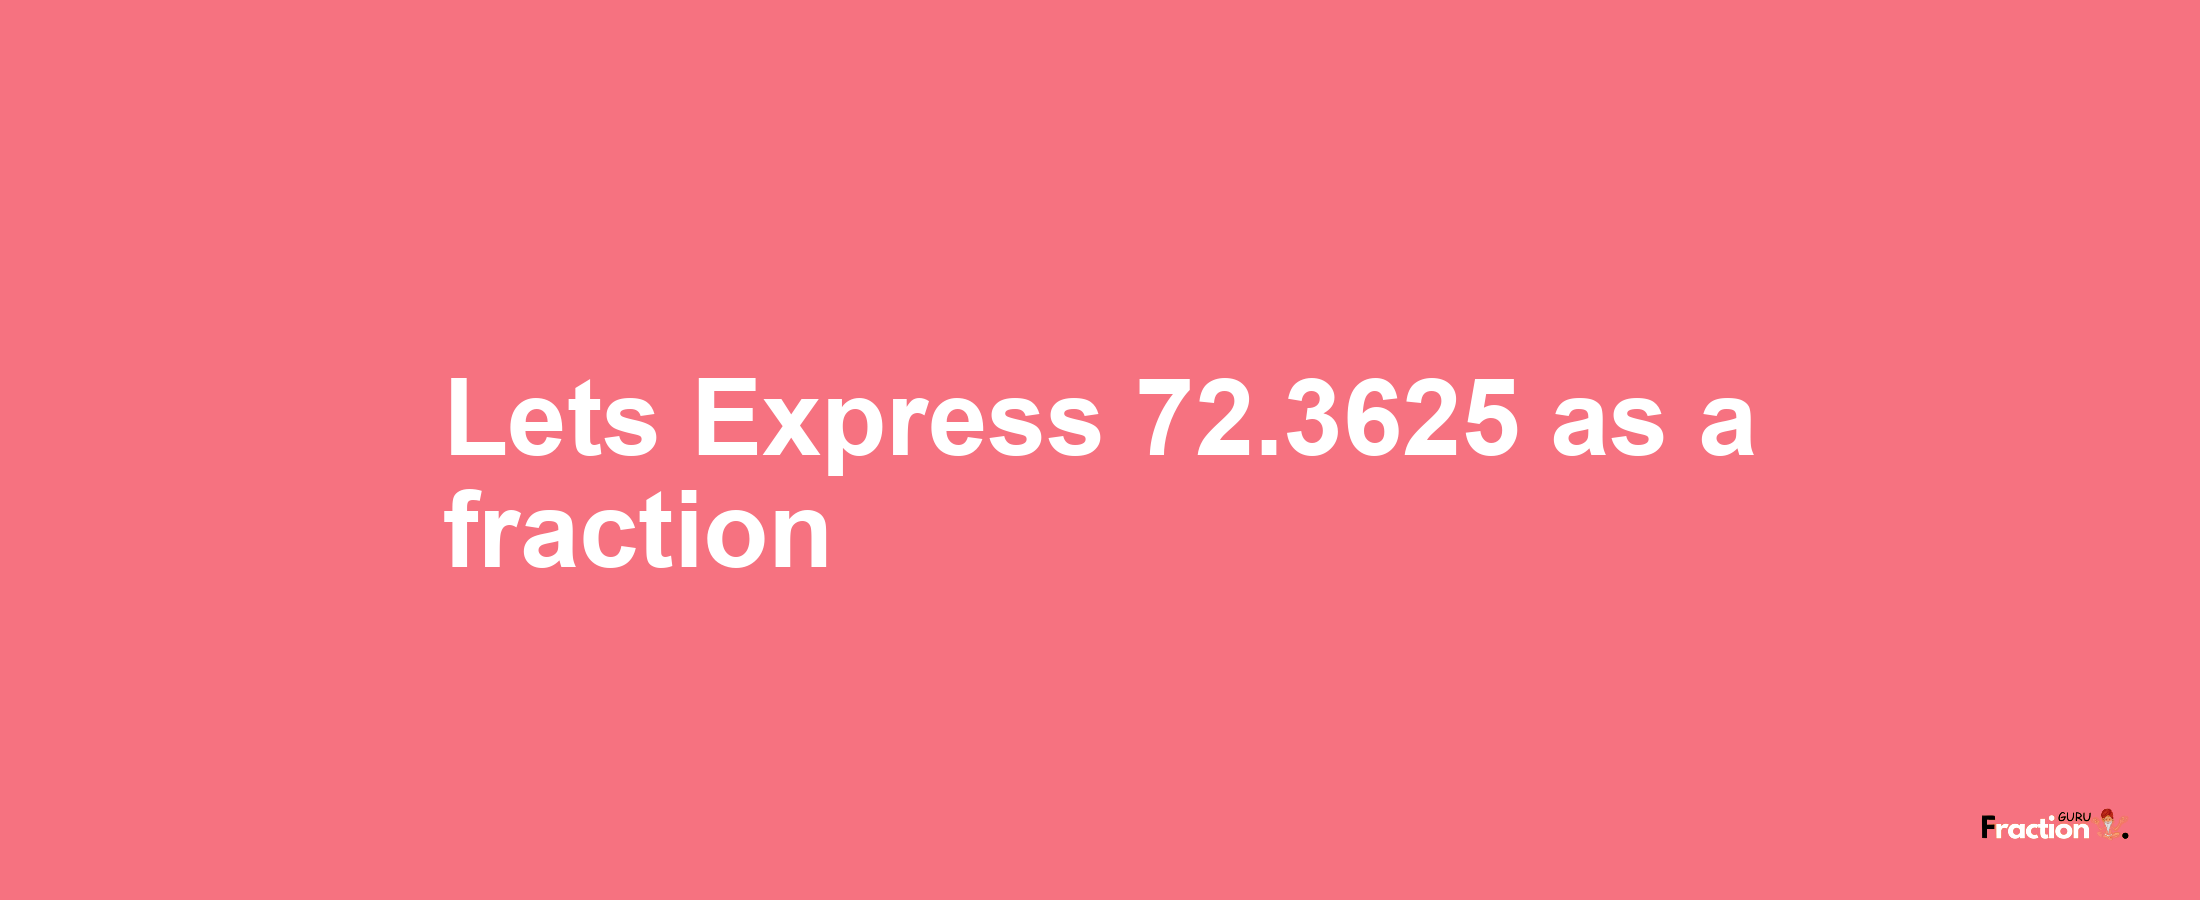 Lets Express 72.3625 as afraction